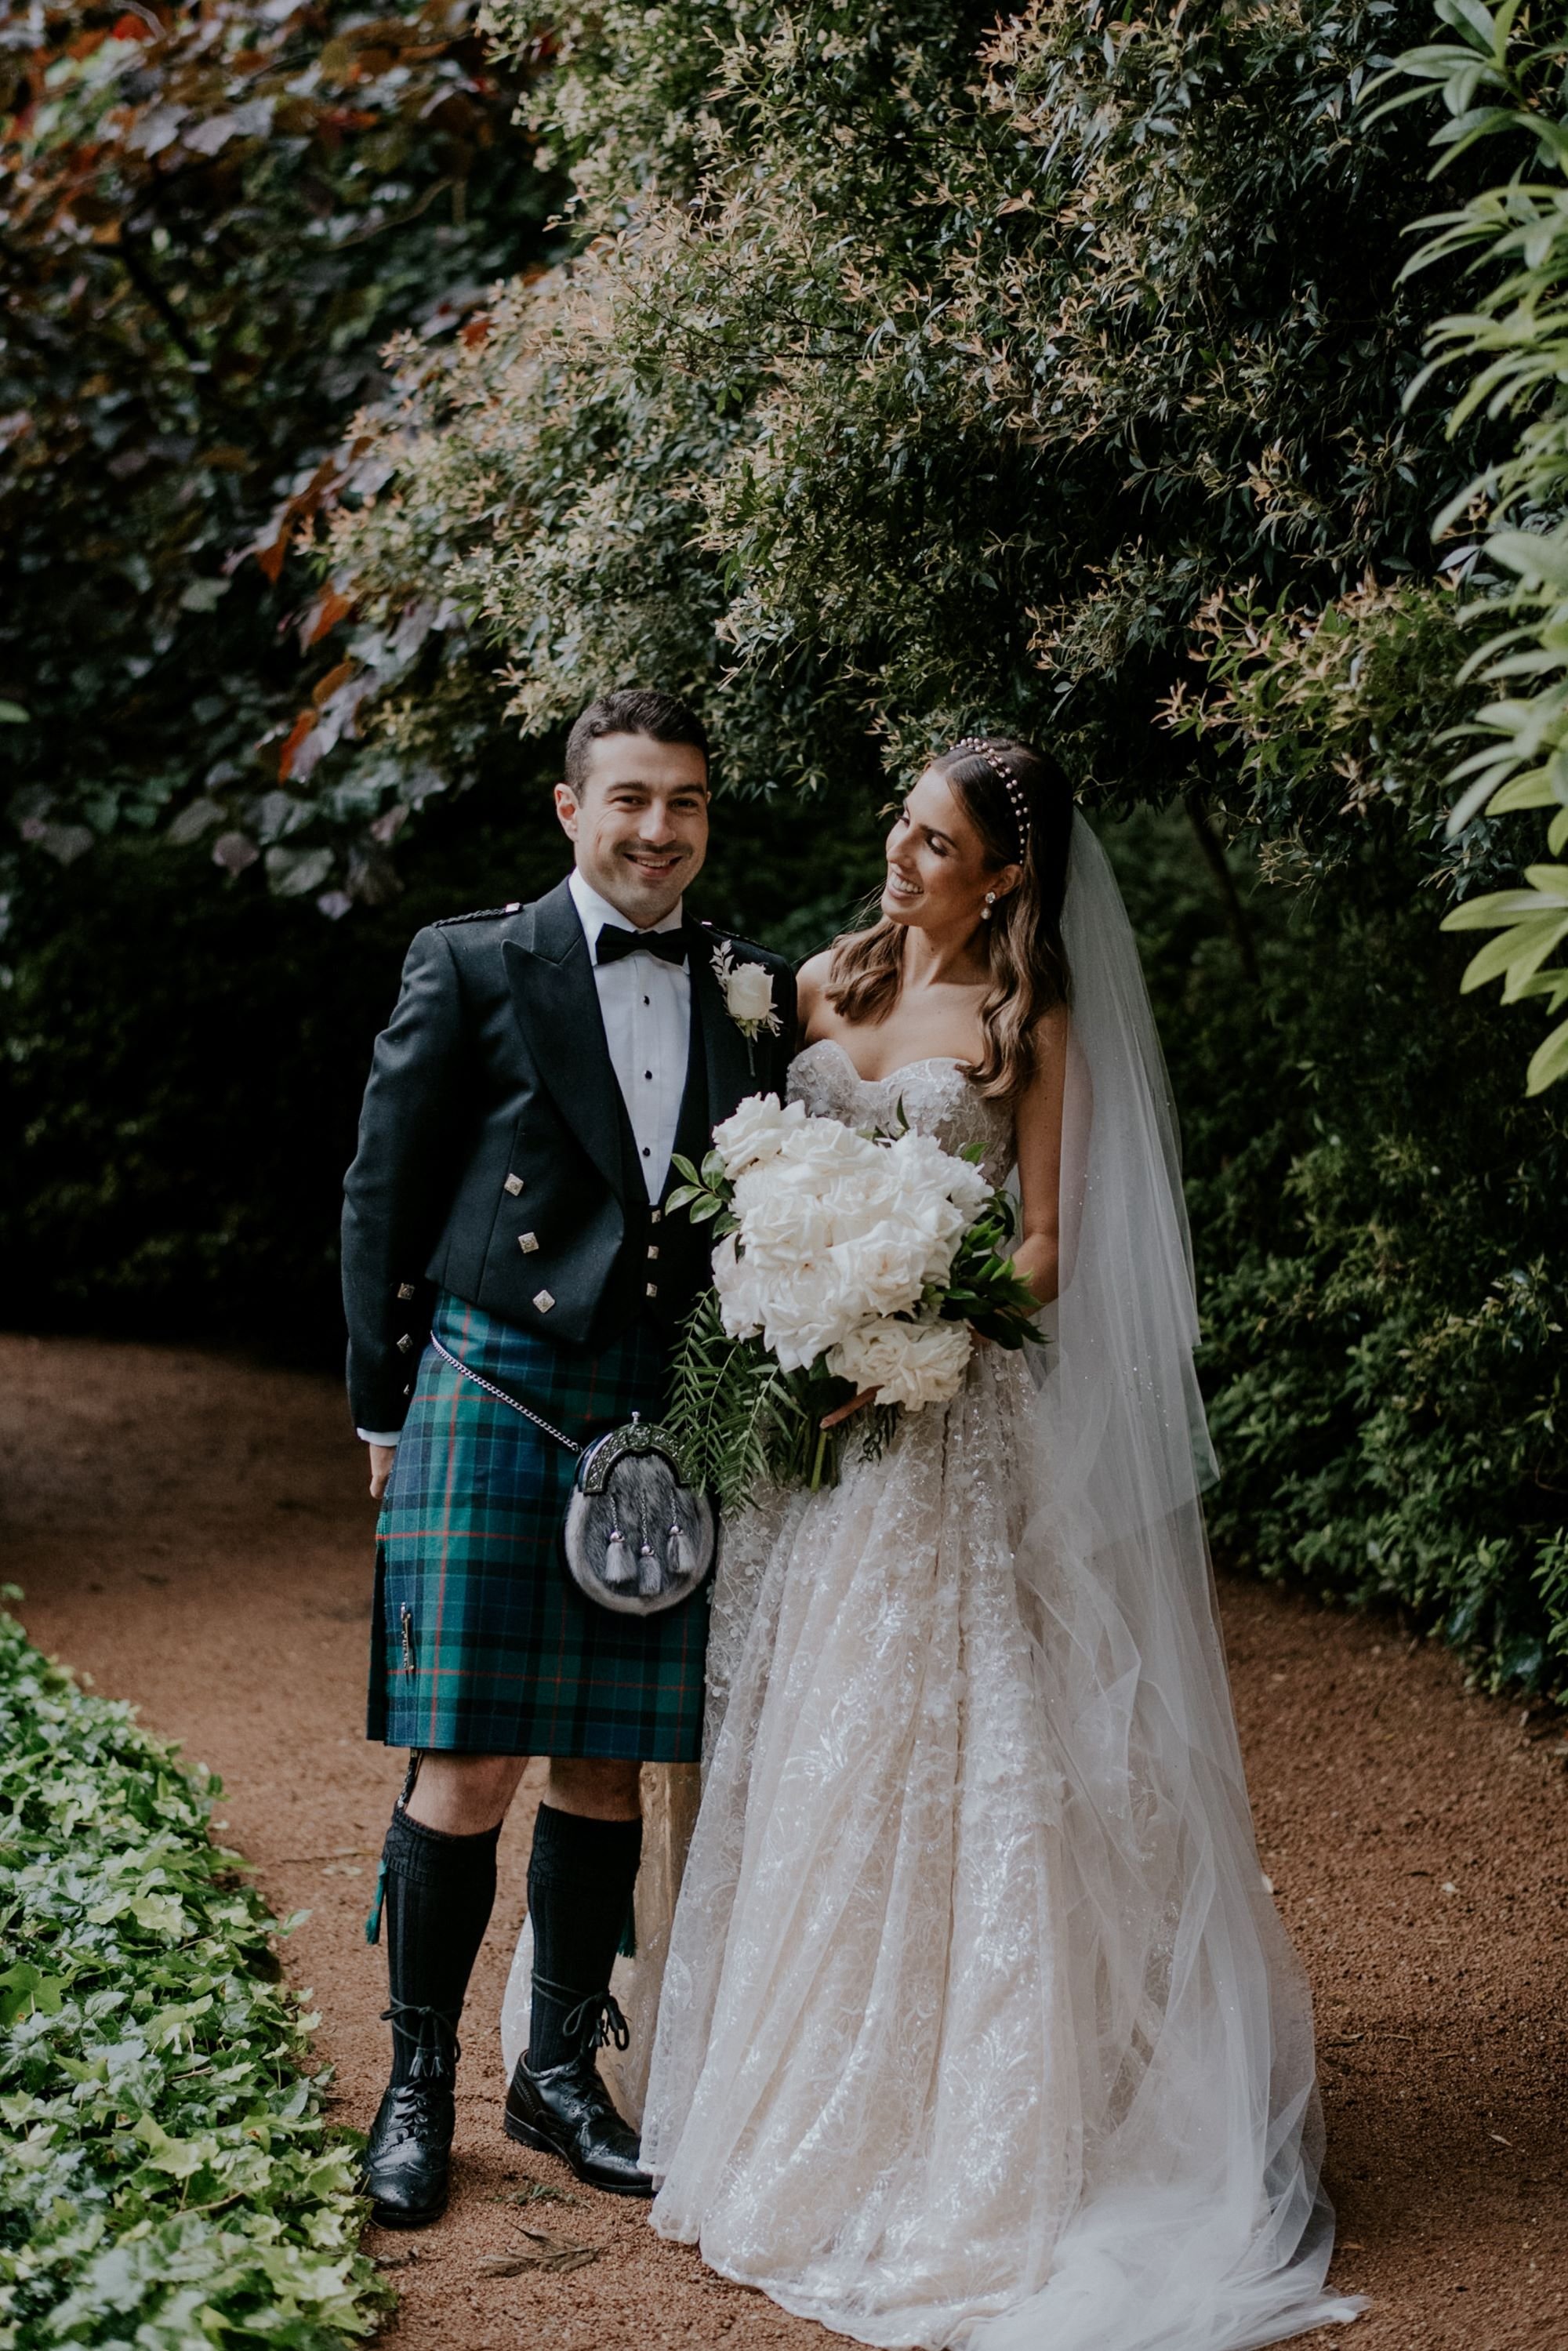 We Fell In Love With » We Fell In Love – Scotland's Wedding Blog